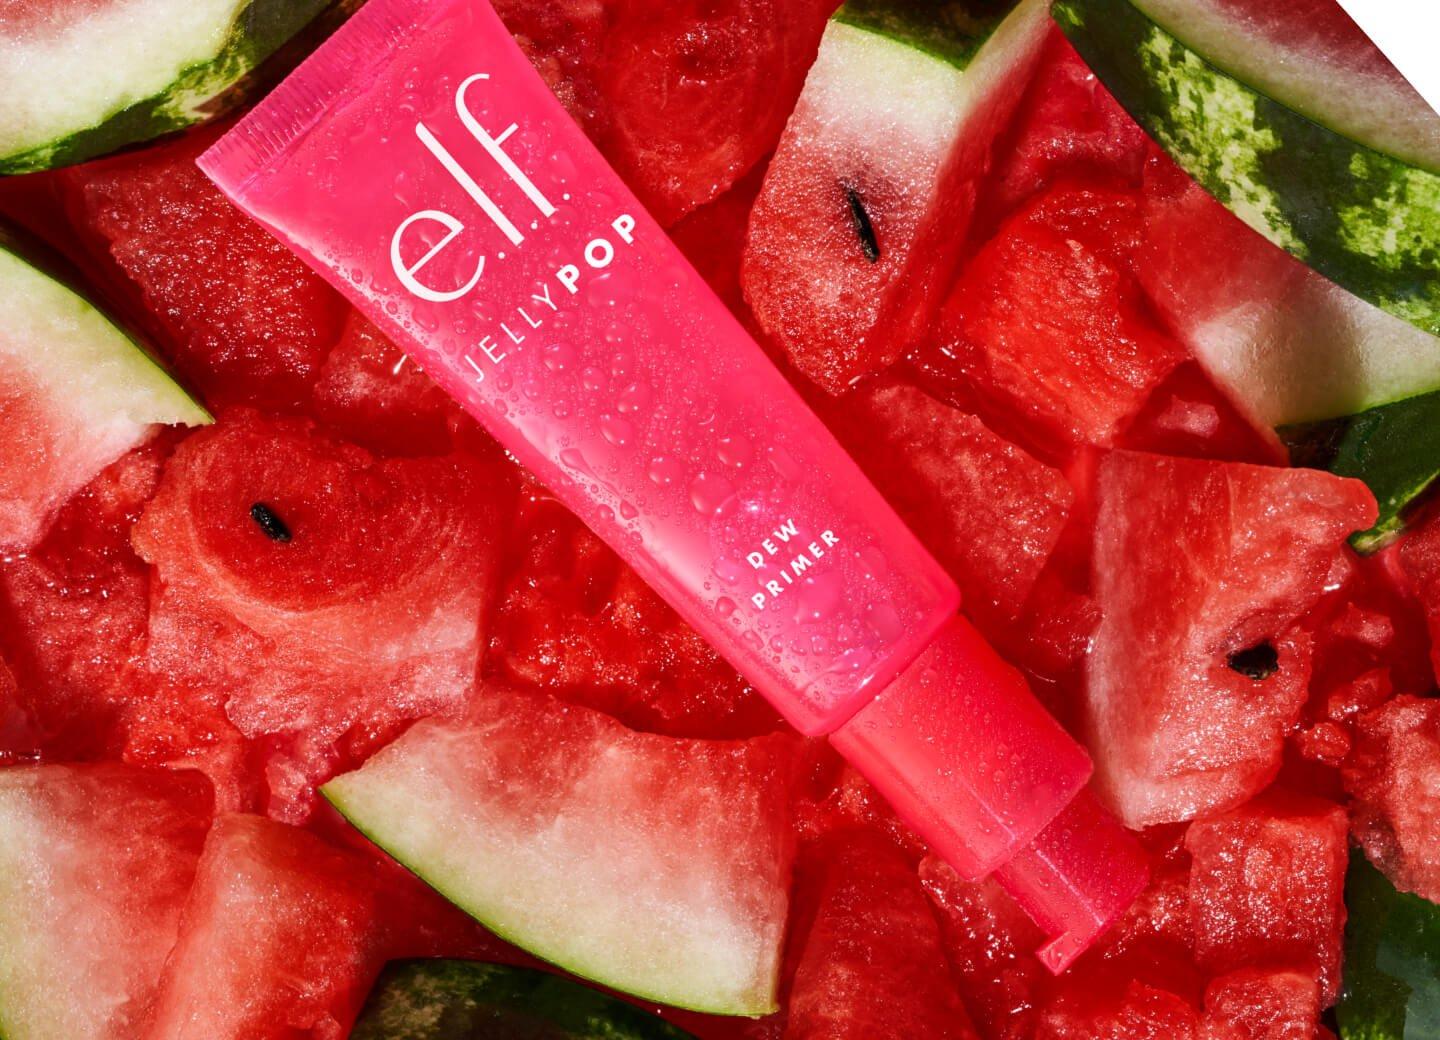 e.l.f. Jelly Pop products